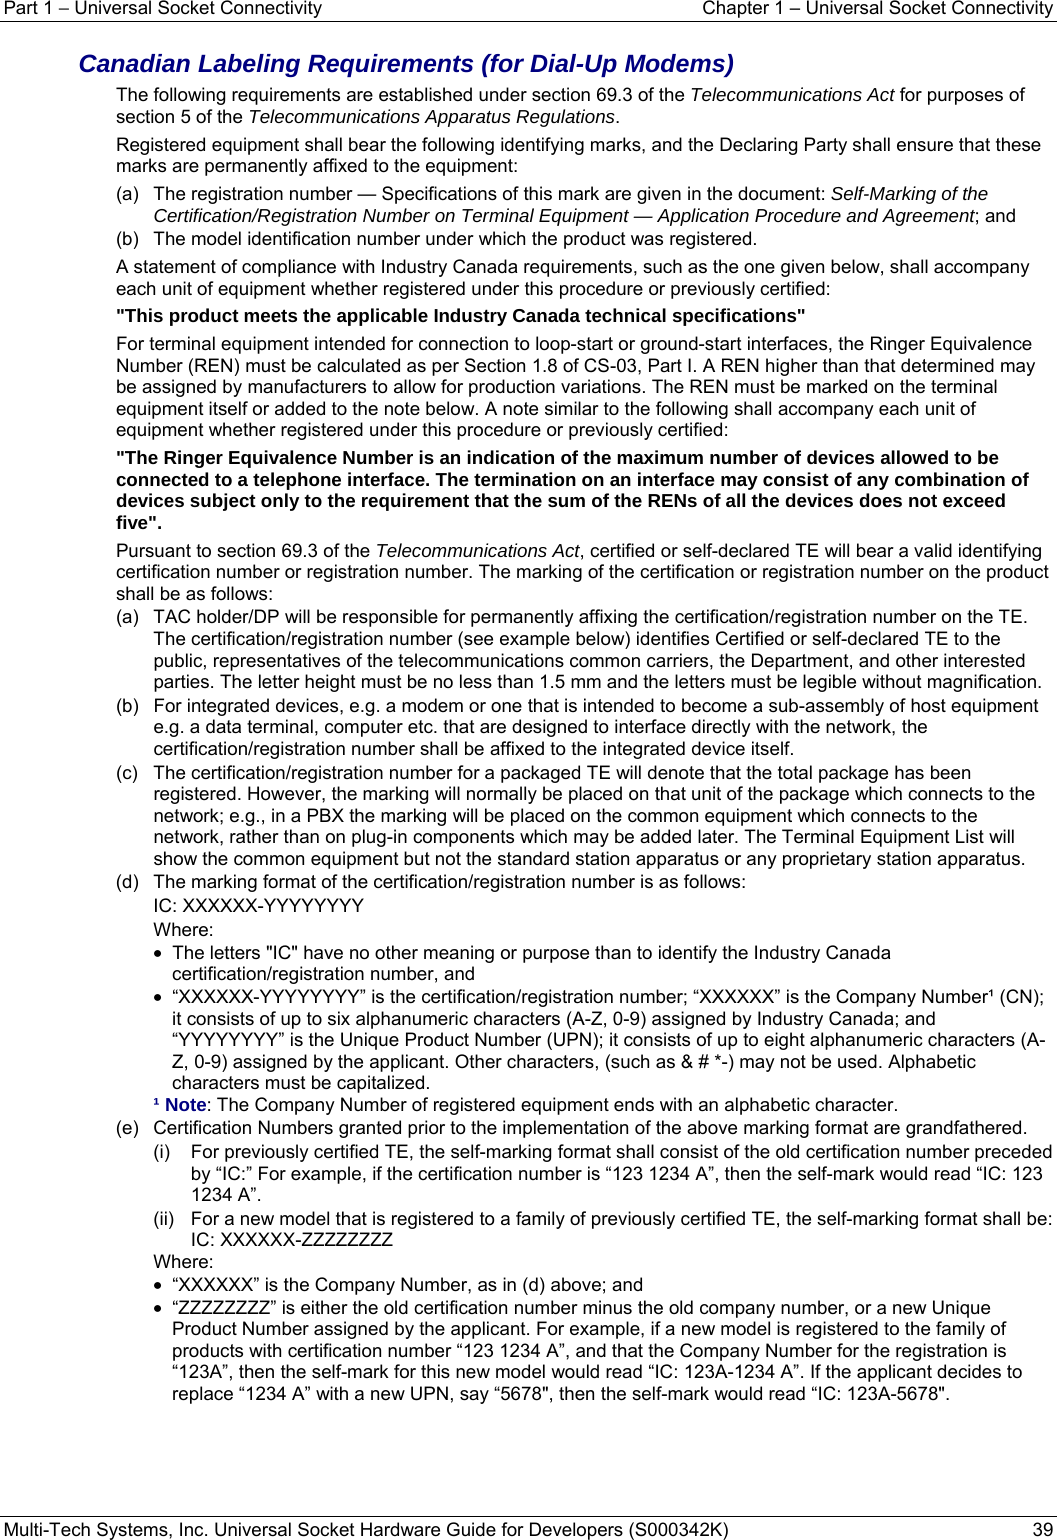 Part 1 − Universal Socket Connectivity    Chapter 1 – Universal Socket Connectivity Multi-Tech Systems, Inc. Universal Socket Hardware Guide for Developers (S000342K)  39  Canadian Labeling Requirements (for Dial-Up Modems) The following requirements are established under section 69.3 of the Telecommunications Act for purposes of section 5 of the Telecommunications Apparatus Regulations. Registered equipment shall bear the following identifying marks, and the Declaring Party shall ensure that these marks are permanently affixed to the equipment: (a)   The registration number — Specifications of this mark are given in the document: Self-Marking of the Certification/Registration Number on Terminal Equipment — Application Procedure and Agreement; and (b)   The model identification number under which the product was registered. A statement of compliance with Industry Canada requirements, such as the one given below, shall accompany each unit of equipment whether registered under this procedure or previously certified: &quot;This product meets the applicable Industry Canada technical specifications&quot; For terminal equipment intended for connection to loop-start or ground-start interfaces, the Ringer Equivalence Number (REN) must be calculated as per Section 1.8 of CS-03, Part I. A REN higher than that determined may be assigned by manufacturers to allow for production variations. The REN must be marked on the terminal equipment itself or added to the note below. A note similar to the following shall accompany each unit of equipment whether registered under this procedure or previously certified: &quot;The Ringer Equivalence Number is an indication of the maximum number of devices allowed to be connected to a telephone interface. The termination on an interface may consist of any combination of devices subject only to the requirement that the sum of the RENs of all the devices does not exceed five&quot;. Pursuant to section 69.3 of the Telecommunications Act, certified or self-declared TE will bear a valid identifying certification number or registration number. The marking of the certification or registration number on the product shall be as follows: (a)   TAC holder/DP will be responsible for permanently affixing the certification/registration number on the TE. The certification/registration number (see example below) identifies Certified or self-declared TE to the public, representatives of the telecommunications common carriers, the Department, and other interested parties. The letter height must be no less than 1.5 mm and the letters must be legible without magnification. (b)   For integrated devices, e.g. a modem or one that is intended to become a sub-assembly of host equipment e.g. a data terminal, computer etc. that are designed to interface directly with the network, the certification/registration number shall be affixed to the integrated device itself. (c)   The certification/registration number for a packaged TE will denote that the total package has been registered. However, the marking will normally be placed on that unit of the package which connects to the network; e.g., in a PBX the marking will be placed on the common equipment which connects to the network, rather than on plug-in components which may be added later. The Terminal Equipment List will show the common equipment but not the standard station apparatus or any proprietary station apparatus. (d)   The marking format of the certification/registration number is as follows: IC: XXXXXX-YYYYYYYY Where: •  The letters &quot;IC&quot; have no other meaning or purpose than to identify the Industry Canada certification/registration number, and •  “XXXXXX-YYYYYYYY” is the certification/registration number; “XXXXXX” is the Company Number¹ (CN); it consists of up to six alphanumeric characters (A-Z, 0-9) assigned by Industry Canada; and “YYYYYYYY” is the Unique Product Number (UPN); it consists of up to eight alphanumeric characters (A-Z, 0-9) assigned by the applicant. Other characters, (such as &amp; # *-) may not be used. Alphabetic characters must be capitalized. ¹ Note: The Company Number of registered equipment ends with an alphabetic character. (e)   Certification Numbers granted prior to the implementation of the above marking format are grandfathered. (i)   For previously certified TE, the self-marking format shall consist of the old certification number preceded by “IC:” For example, if the certification number is “123 1234 A”, then the self-mark would read “IC: 123 1234 A”. (ii)   For a new model that is registered to a family of previously certified TE, the self-marking format shall be: IC: XXXXXX-ZZZZZZZZ Where:  •  “XXXXXX” is the Company Number, as in (d) above; and •  “ZZZZZZZZ” is either the old certification number minus the old company number, or a new Unique Product Number assigned by the applicant. For example, if a new model is registered to the family of products with certification number “123 1234 A”, and that the Company Number for the registration is “123A”, then the self-mark for this new model would read “IC: 123A-1234 A”. If the applicant decides to replace “1234 A” with a new UPN, say “5678&quot;, then the self-mark would read “IC: 123A-5678&quot;.   